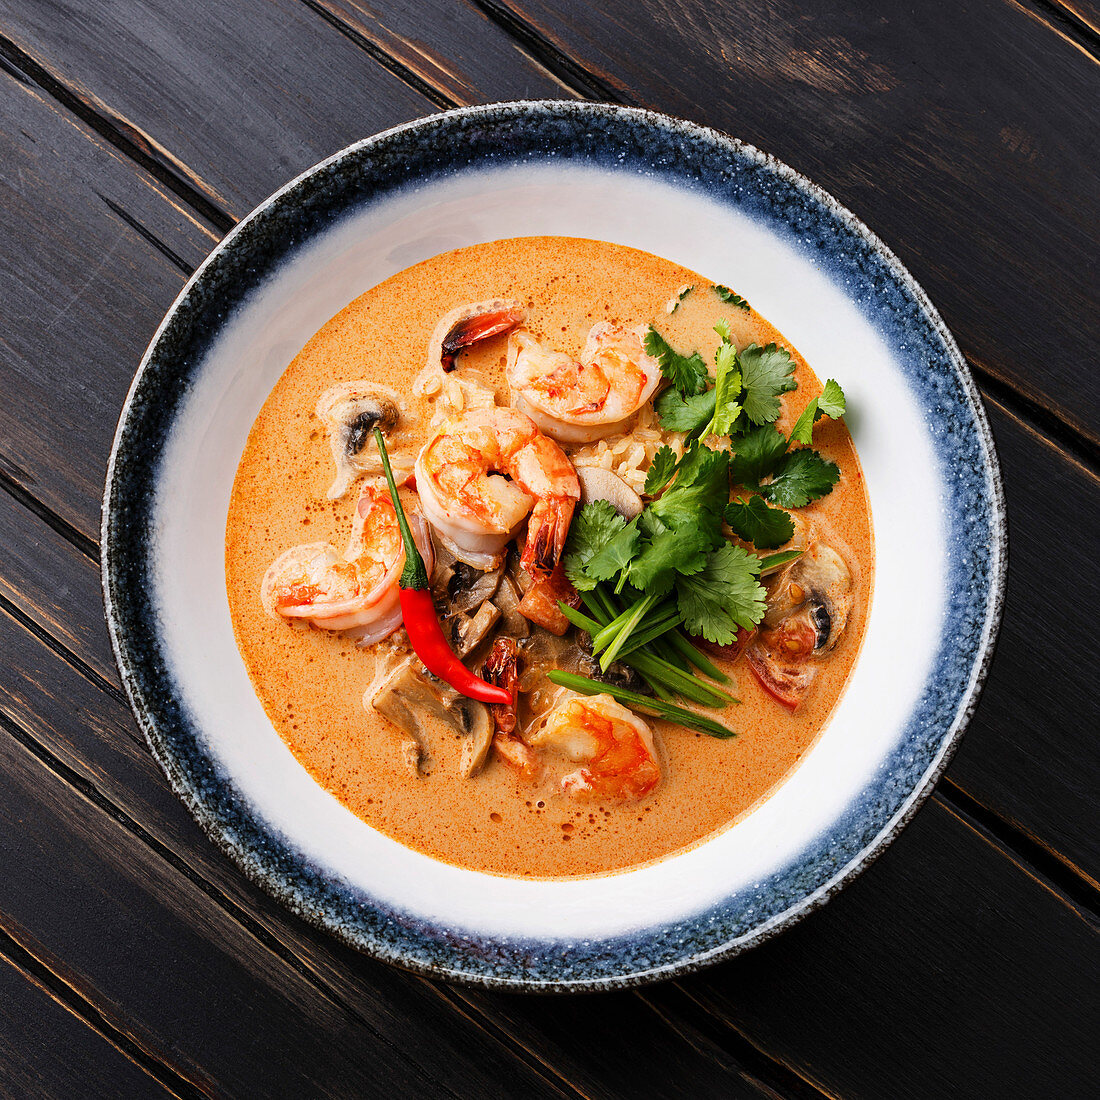 Tom Yam kung Spicy Thai soup with shrimp, seafood, coconut milk and chili pepper in bowl close-up